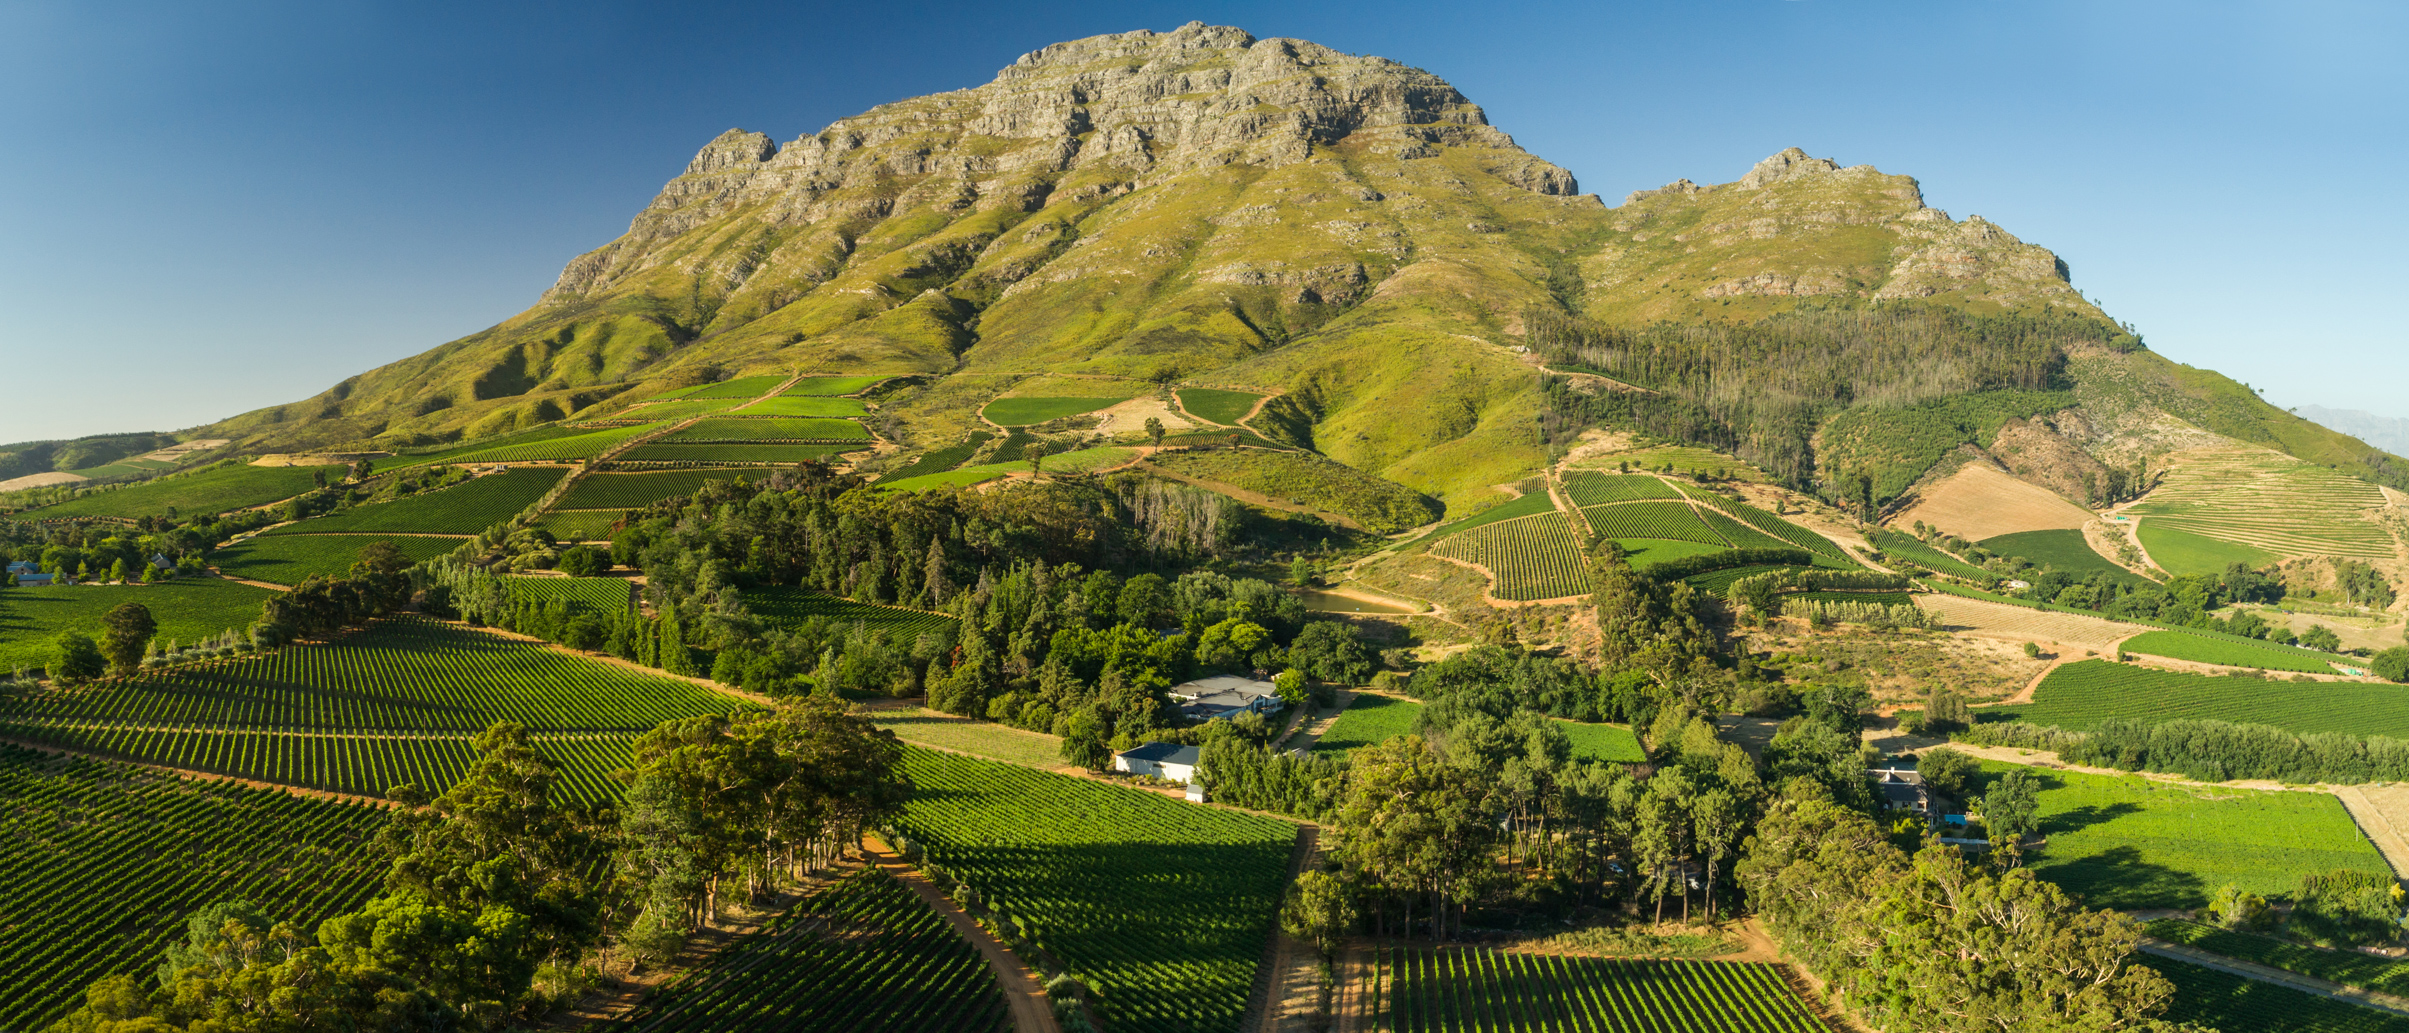 Thelema Vineyards at the foot of the Simonsberg mountains